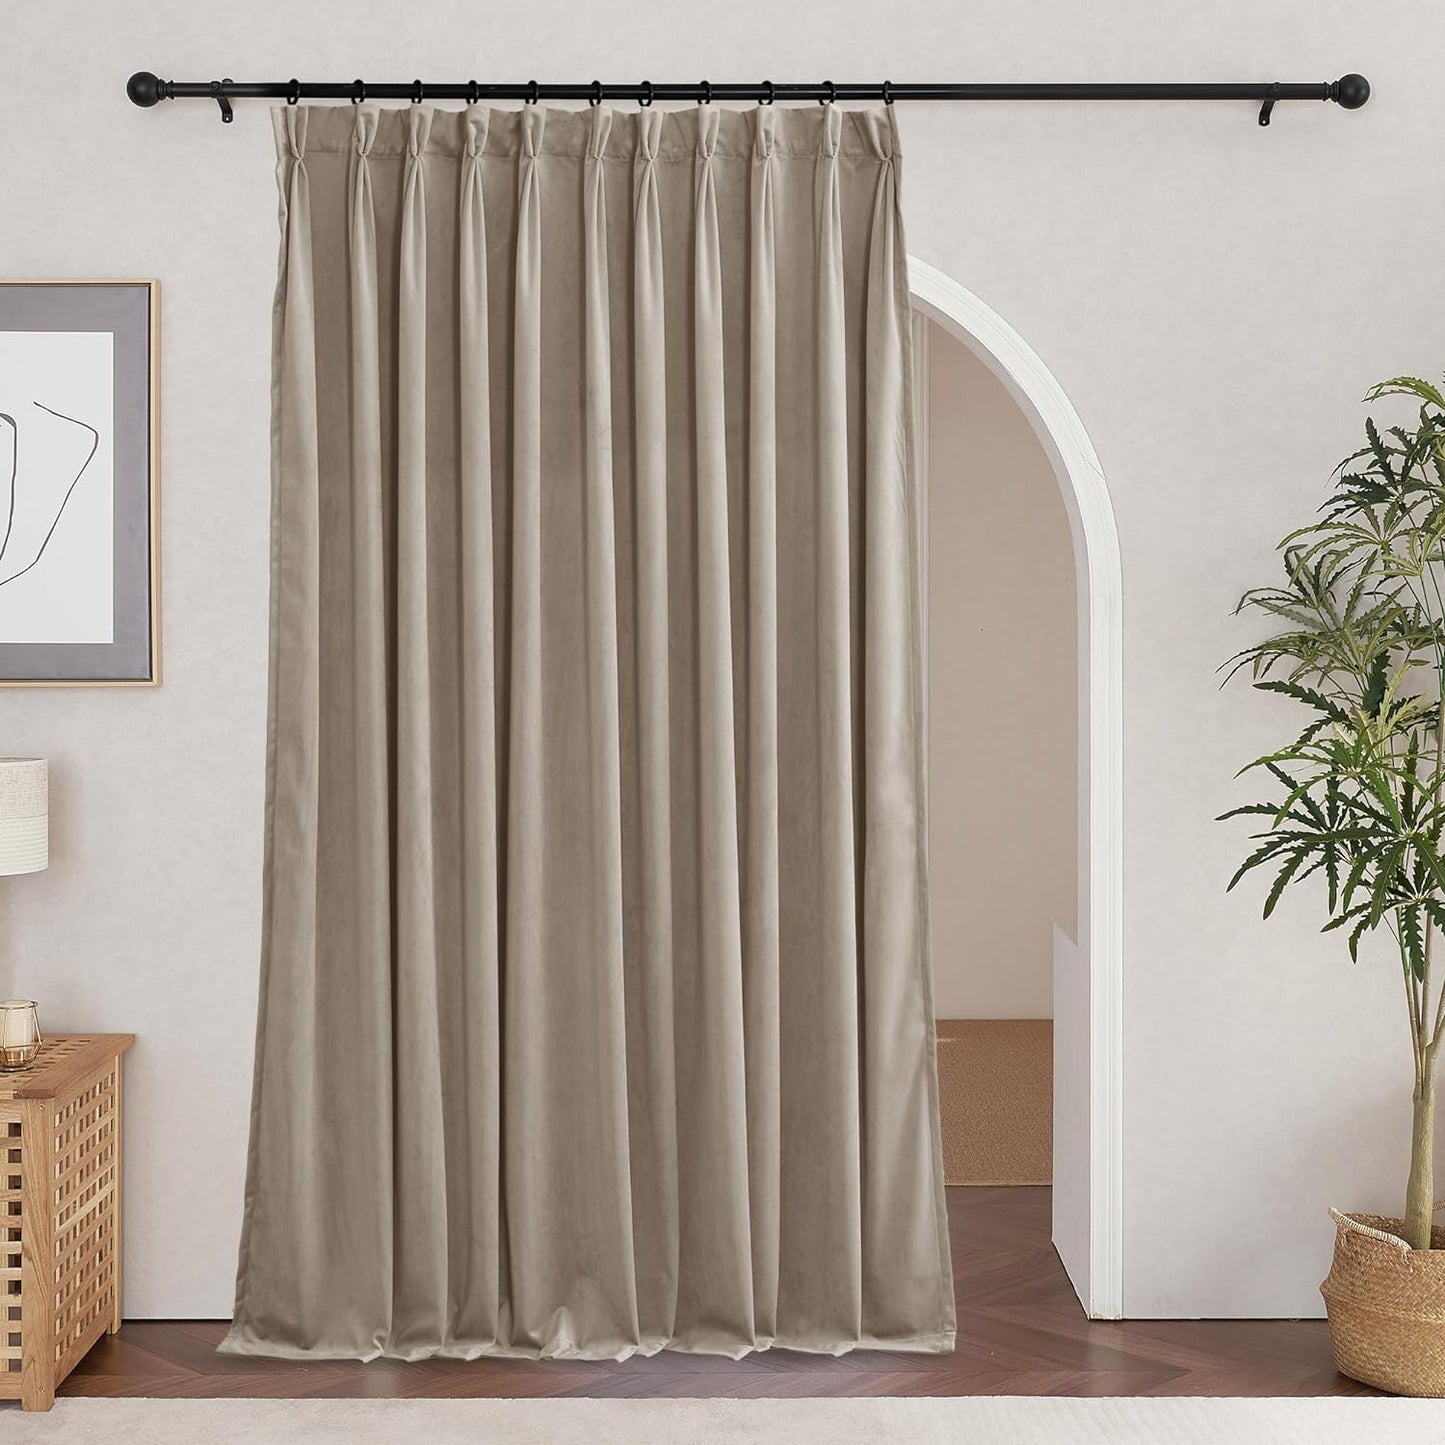 RYB HOME Velvet Curtains 84 Inches 2 Panels Set, Pinch Pleated Room Darkening Thermal Insulated Luxury Decor for Bedroom Parlor Nursery, Camel Beige, W66 X L84 Inches  RYB HOME   